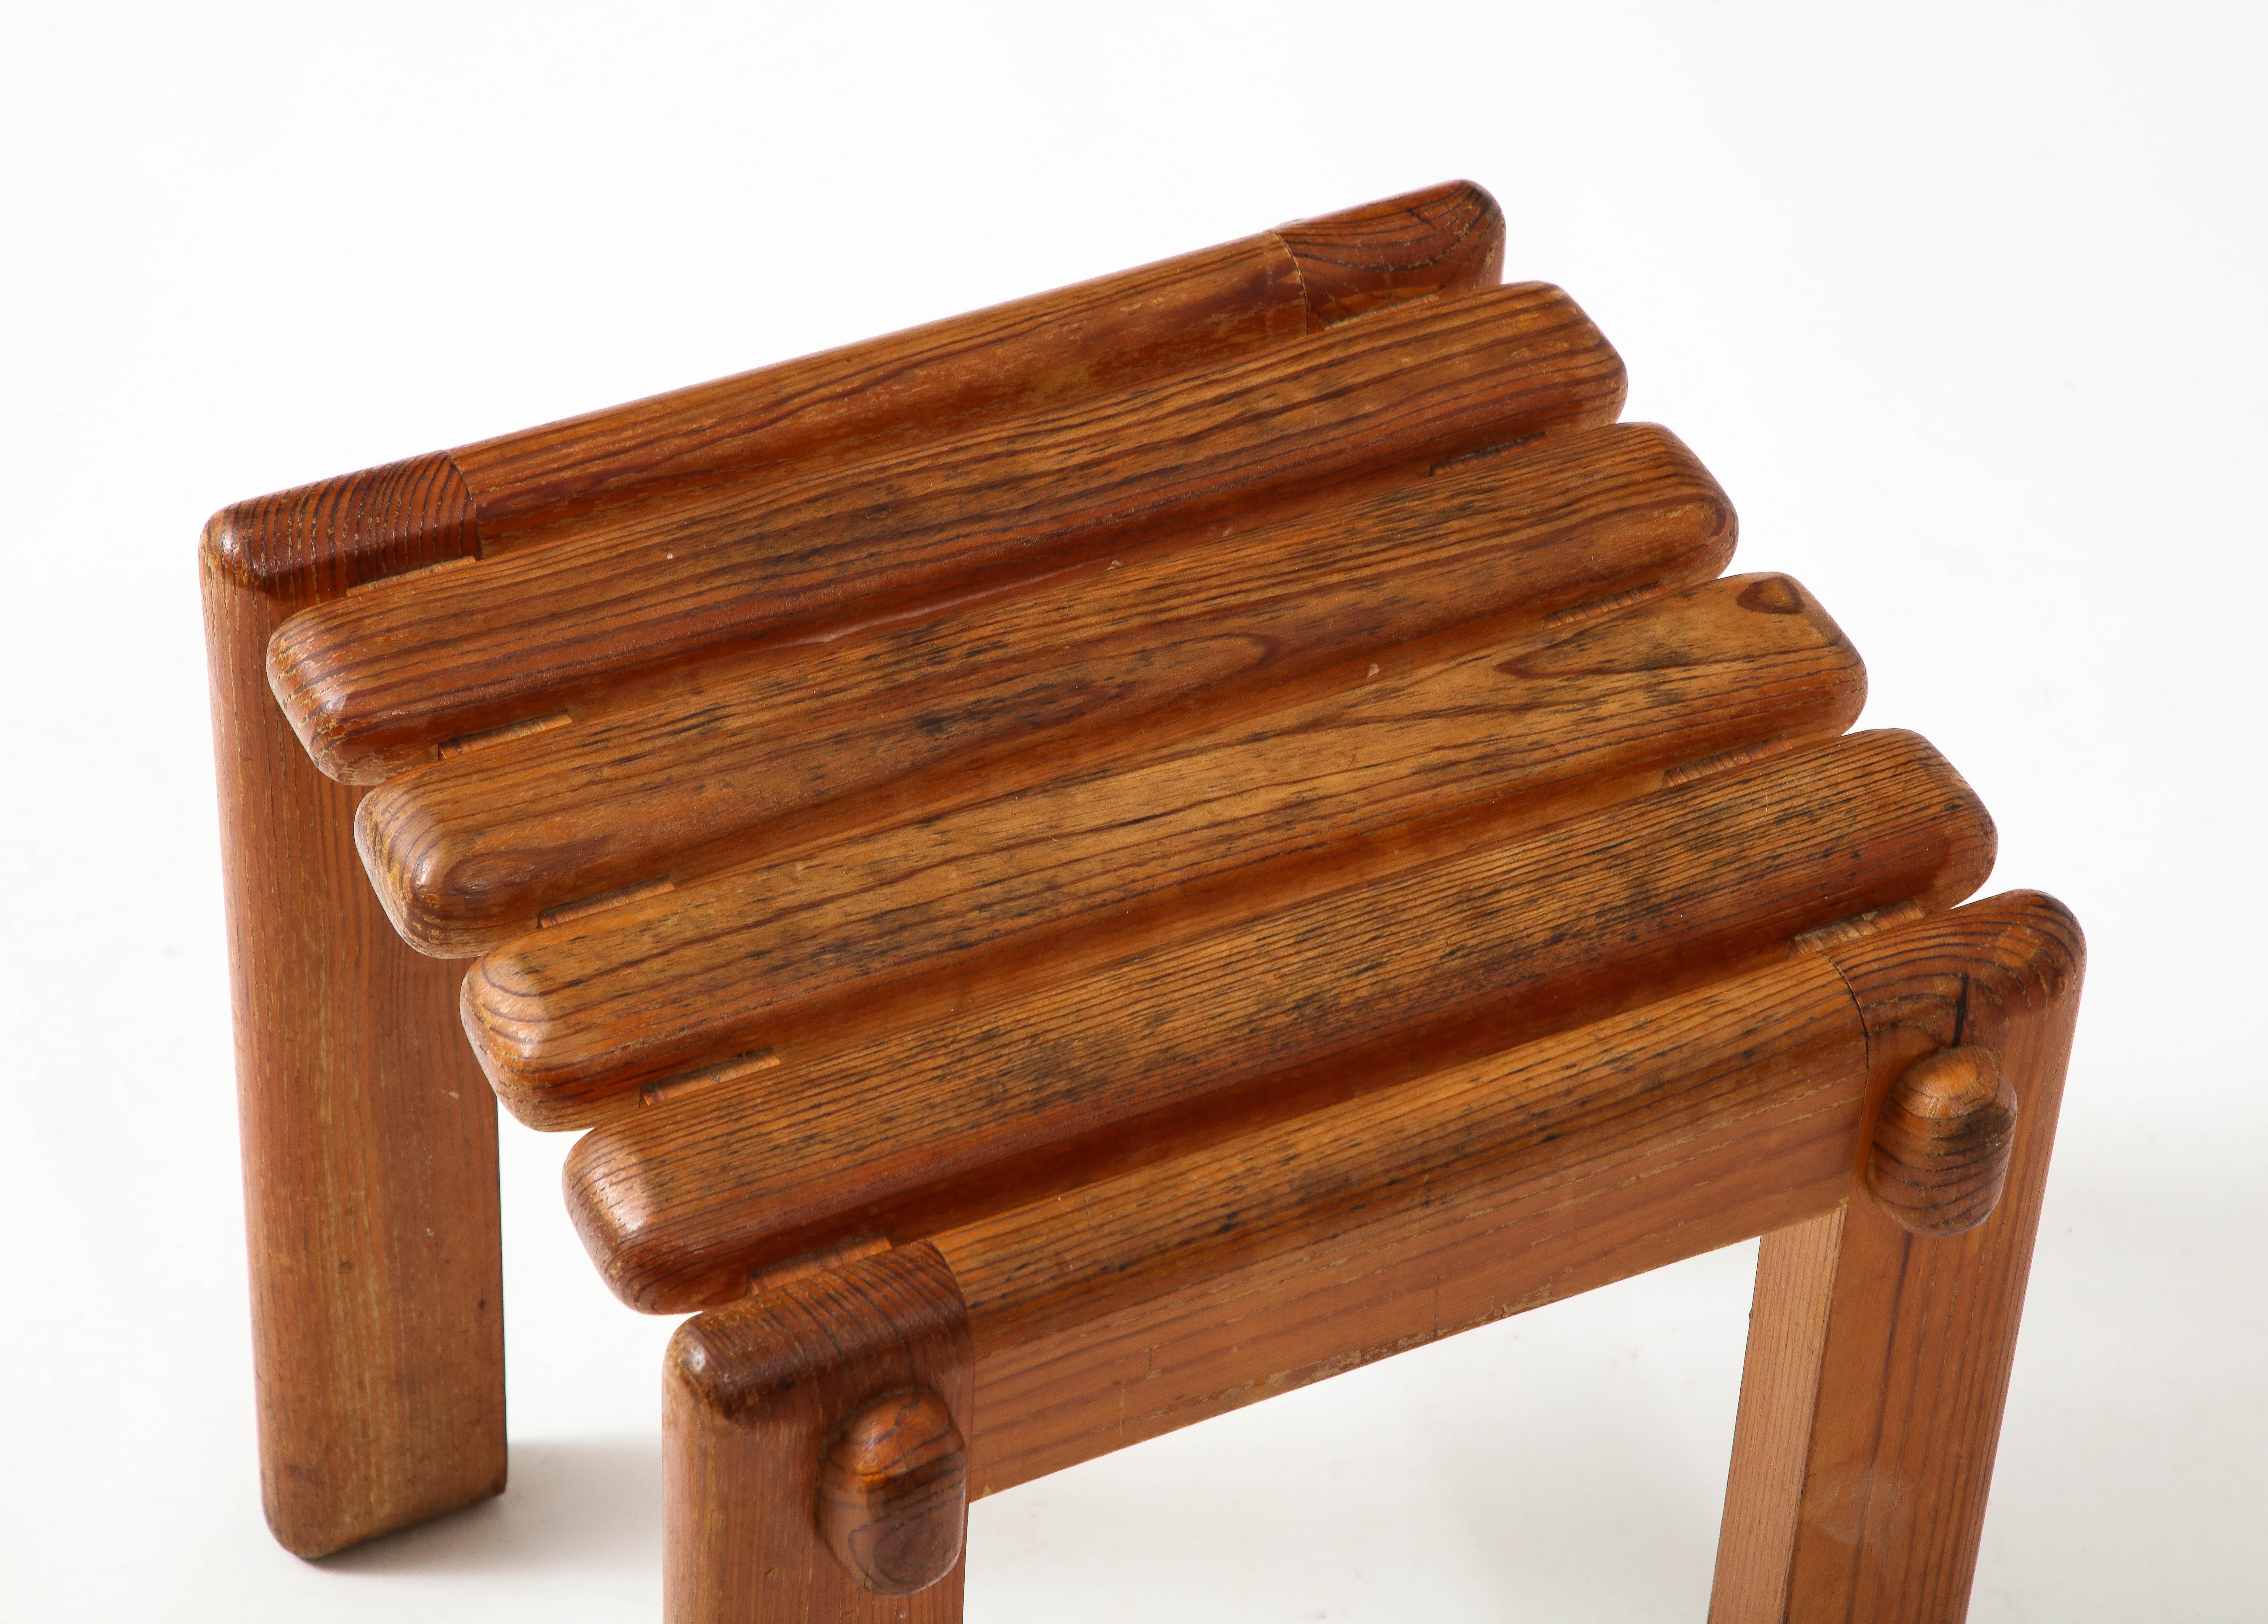 Slat stool in solid oak with interesting details and construction.